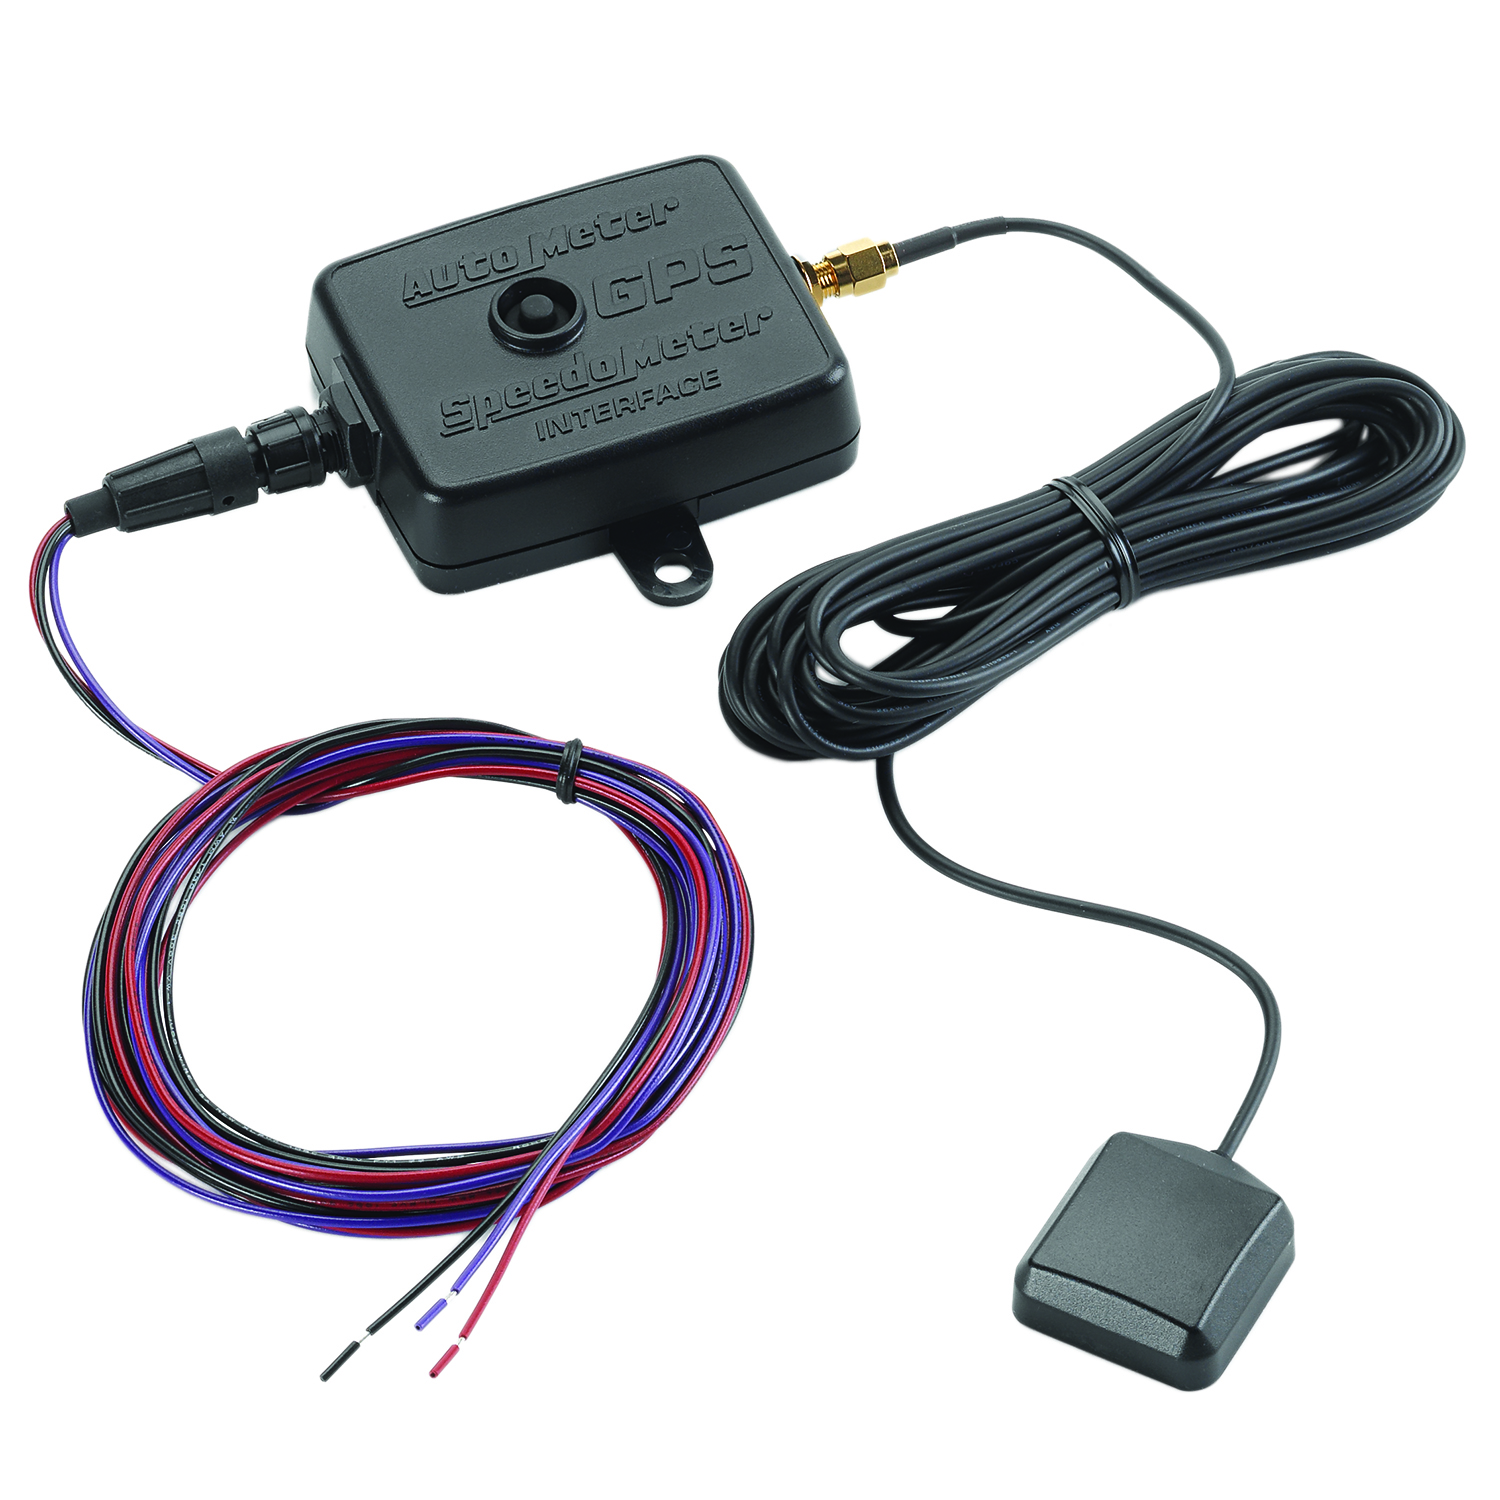 Picture of Auto Meter 5289 Sensor Module, Gps Speedometer Interface, 16ft. Cable, Incl. Gps Antenna